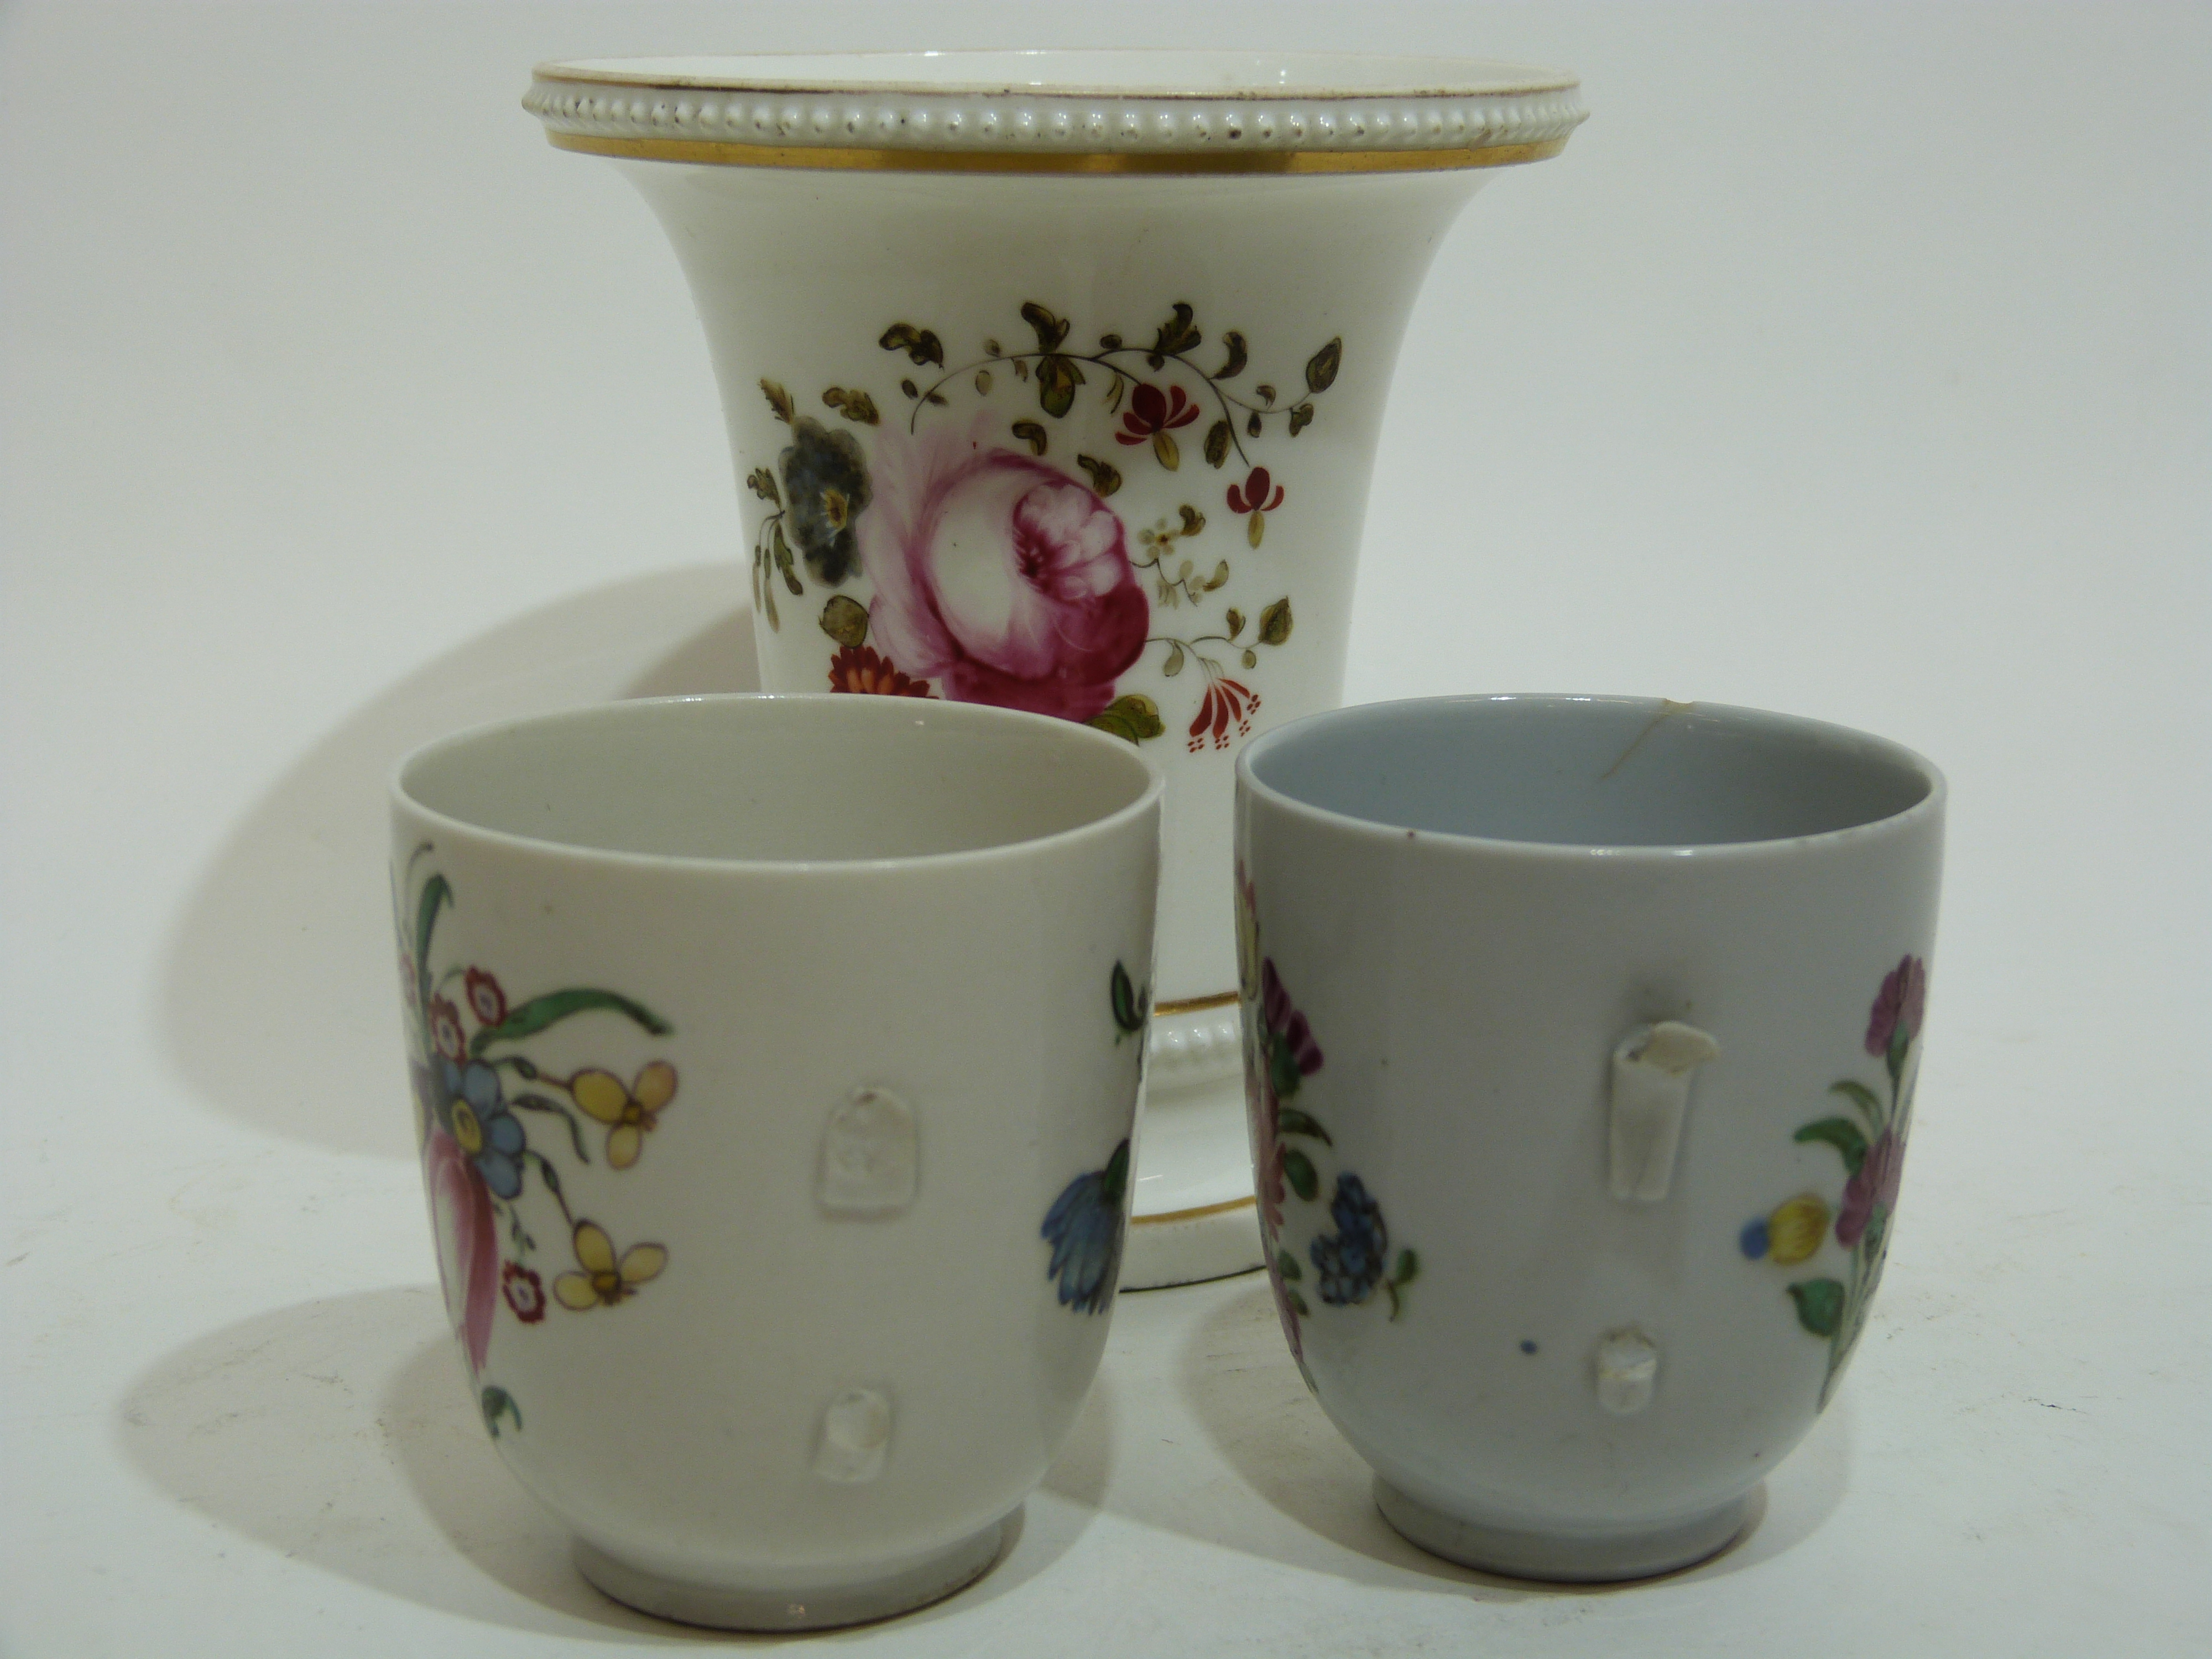 19th century English porcelain beaker vase, probably Spode, decorated with floral sprays, together - Image 2 of 2